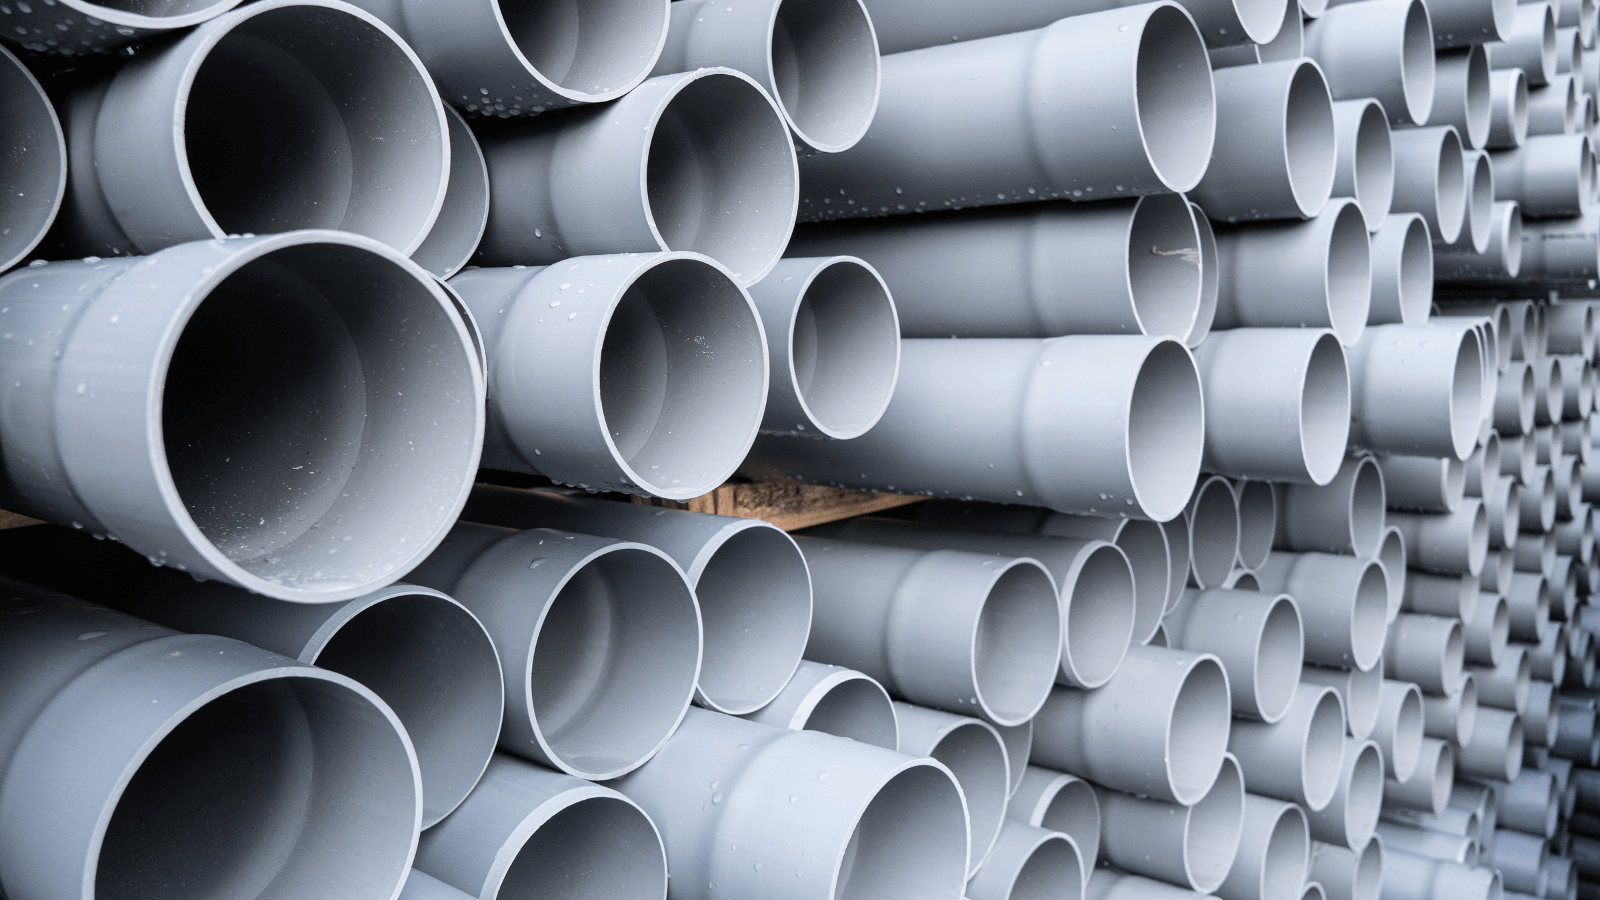 Industrial PVC pipes